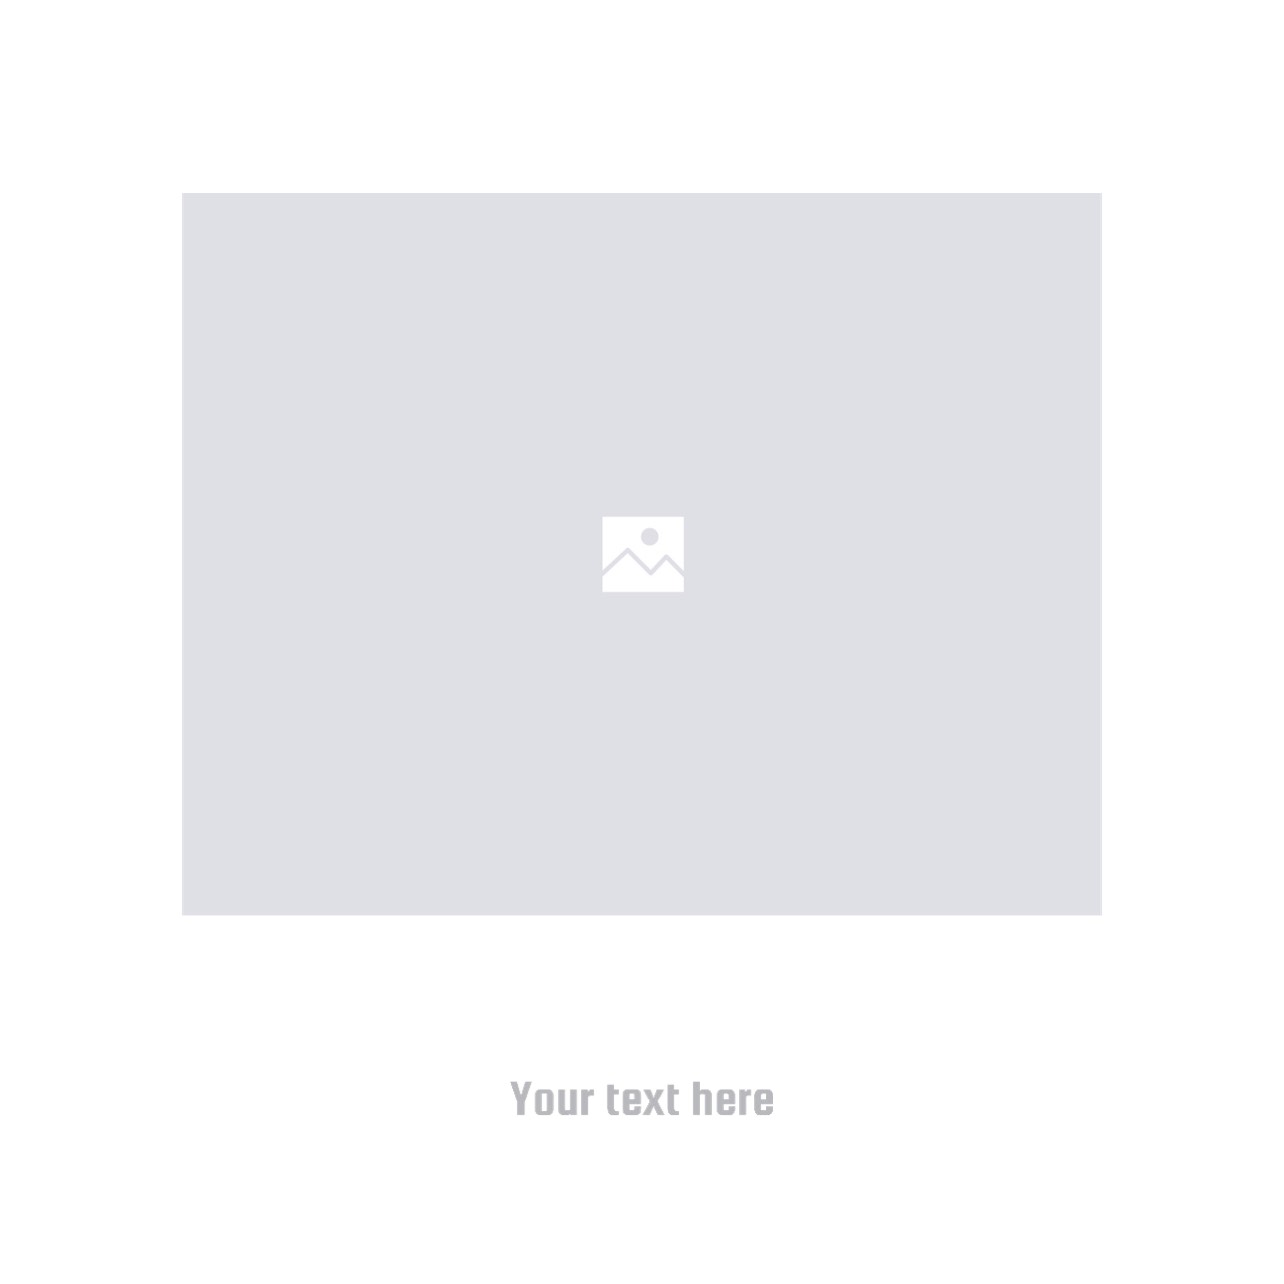 An Image Of A White Square With A White Background Layouts Template